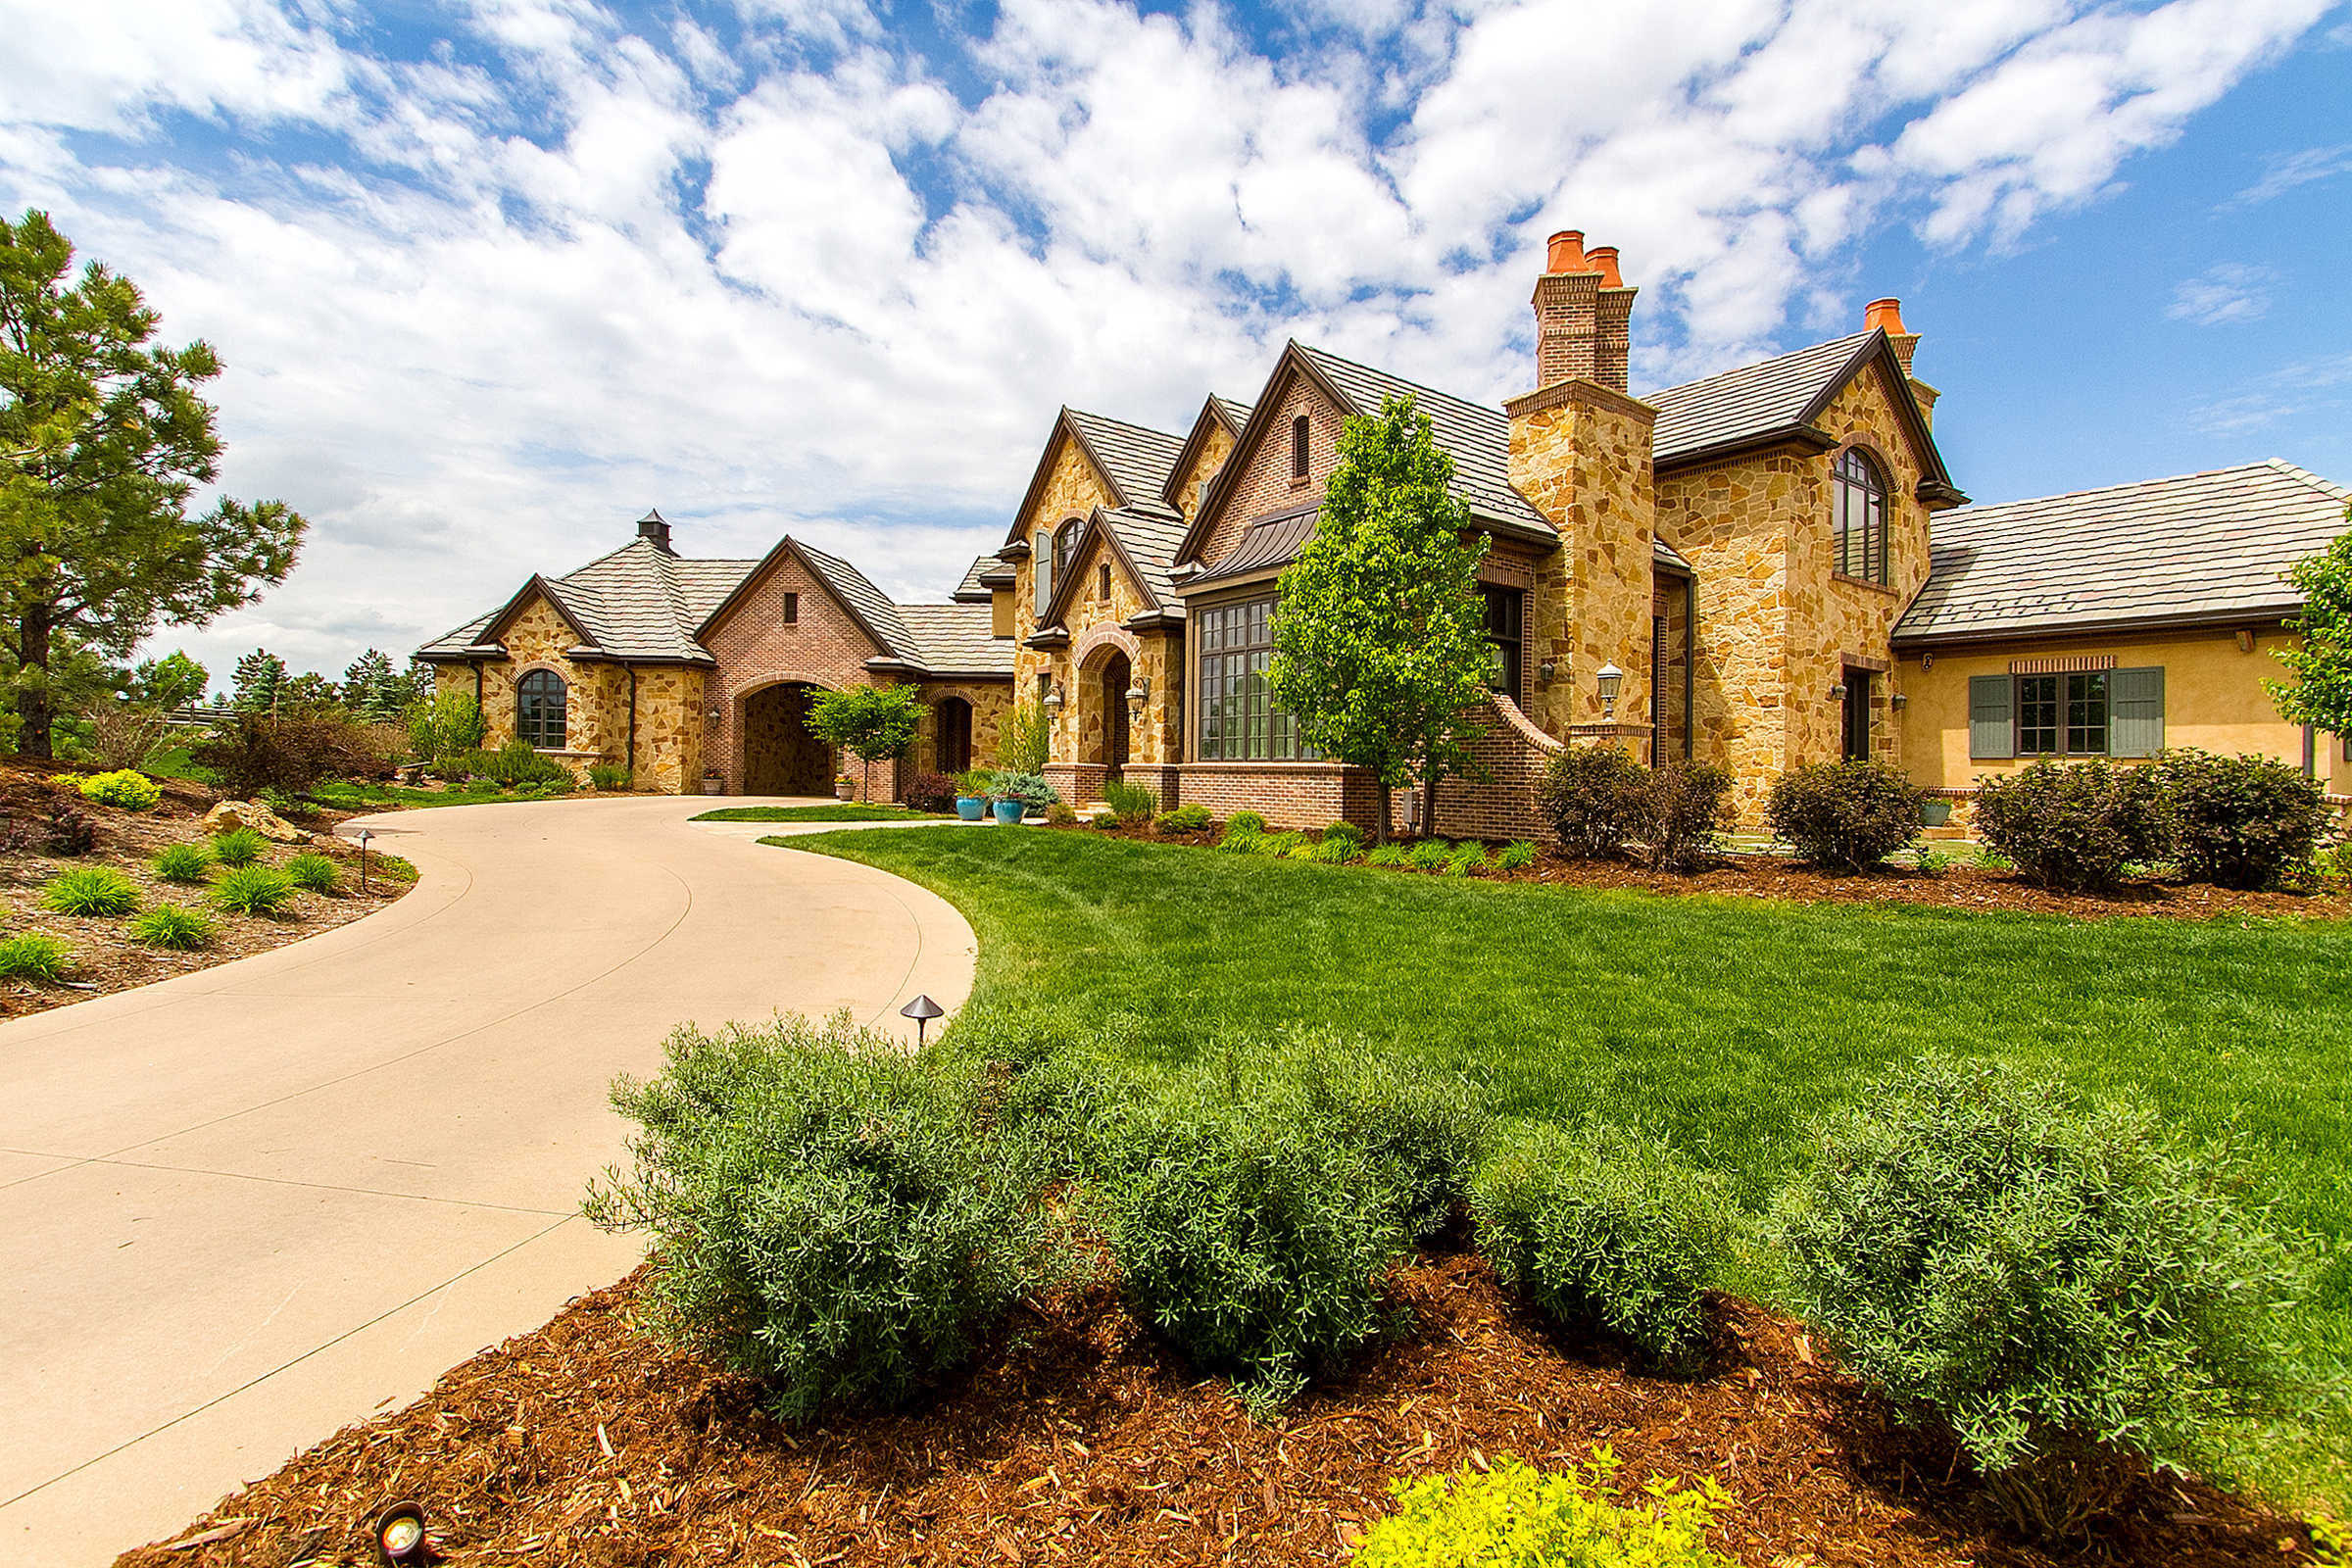 Pictured: Sold – 4081 Preserve Parkway, Greenwood Village CO. Listed by LIV Sotheby’s International Realty broker, Janet Kritzer, for $4,700,000.